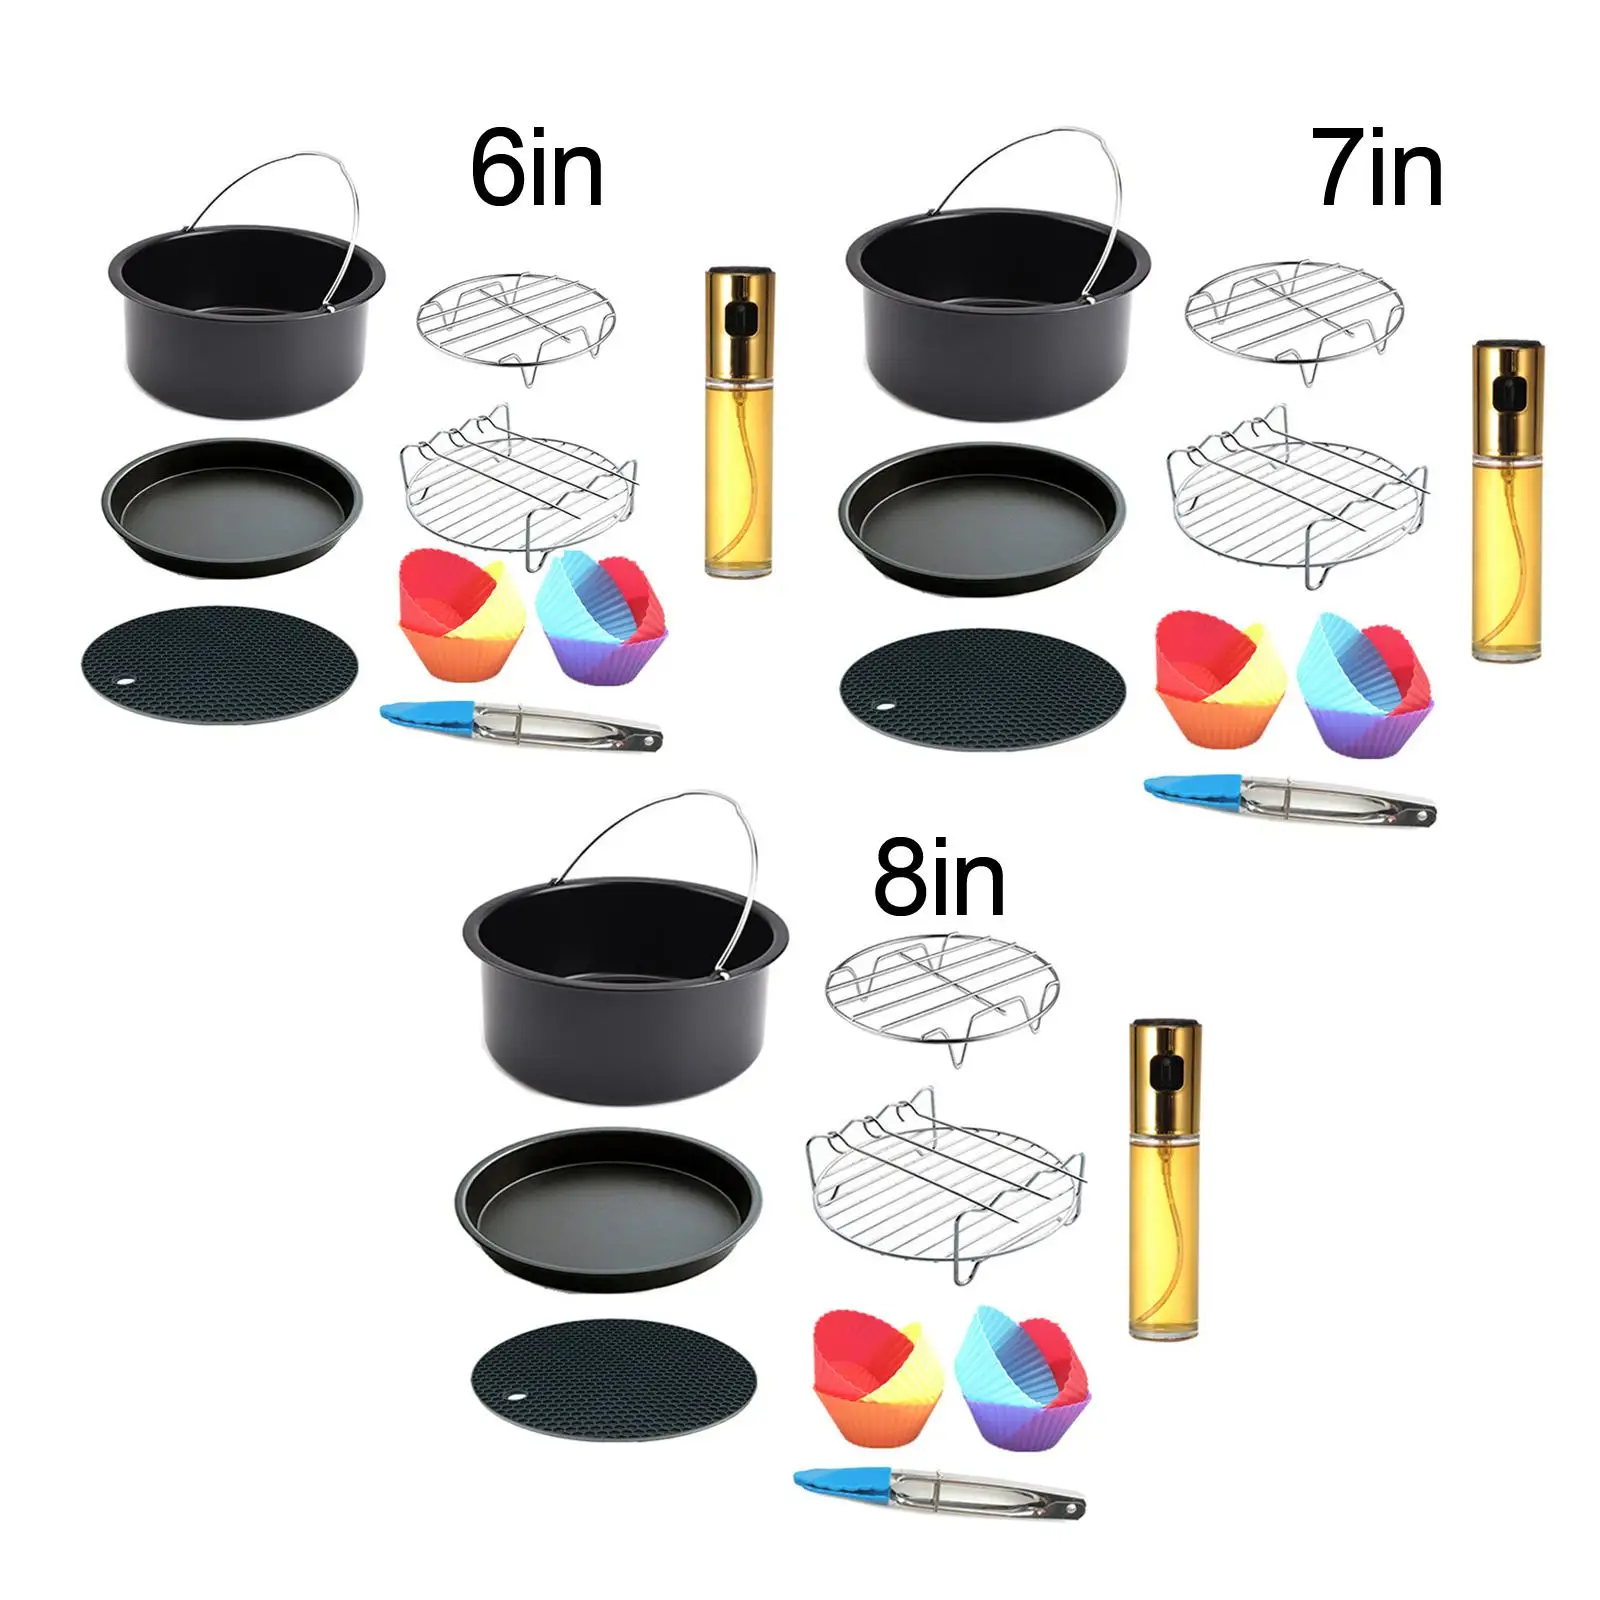 13 Pieces Heißluftfritteuse Accessories Set Cake Cups Cake Basket for Baking Cooking chen BBQ